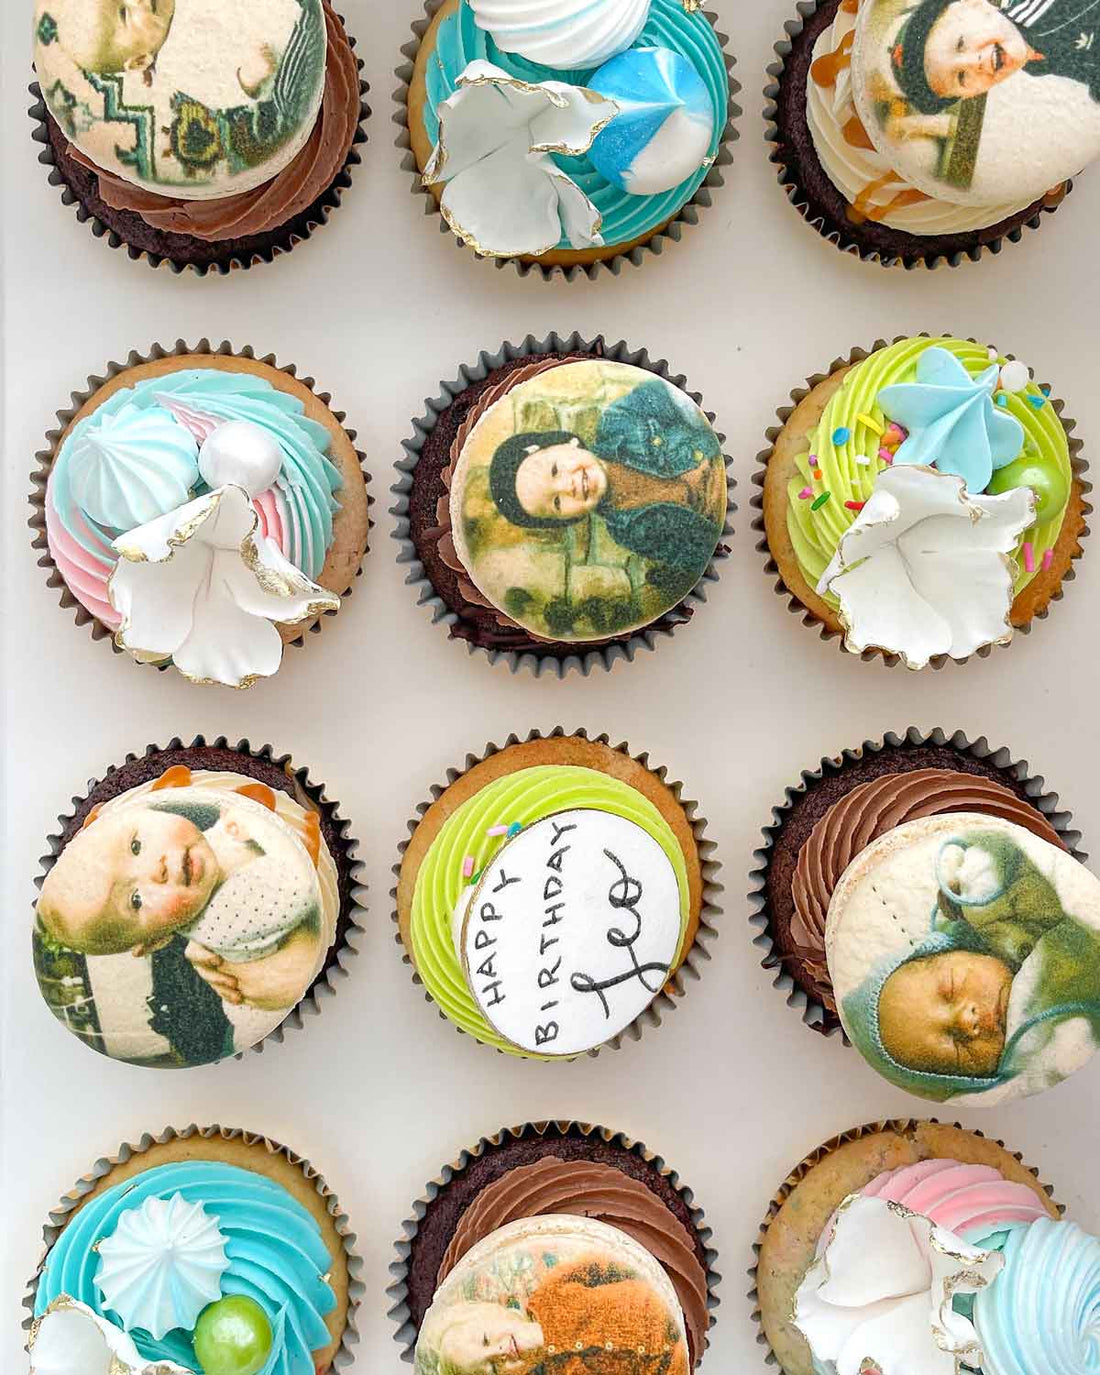 The Works Cupcakes